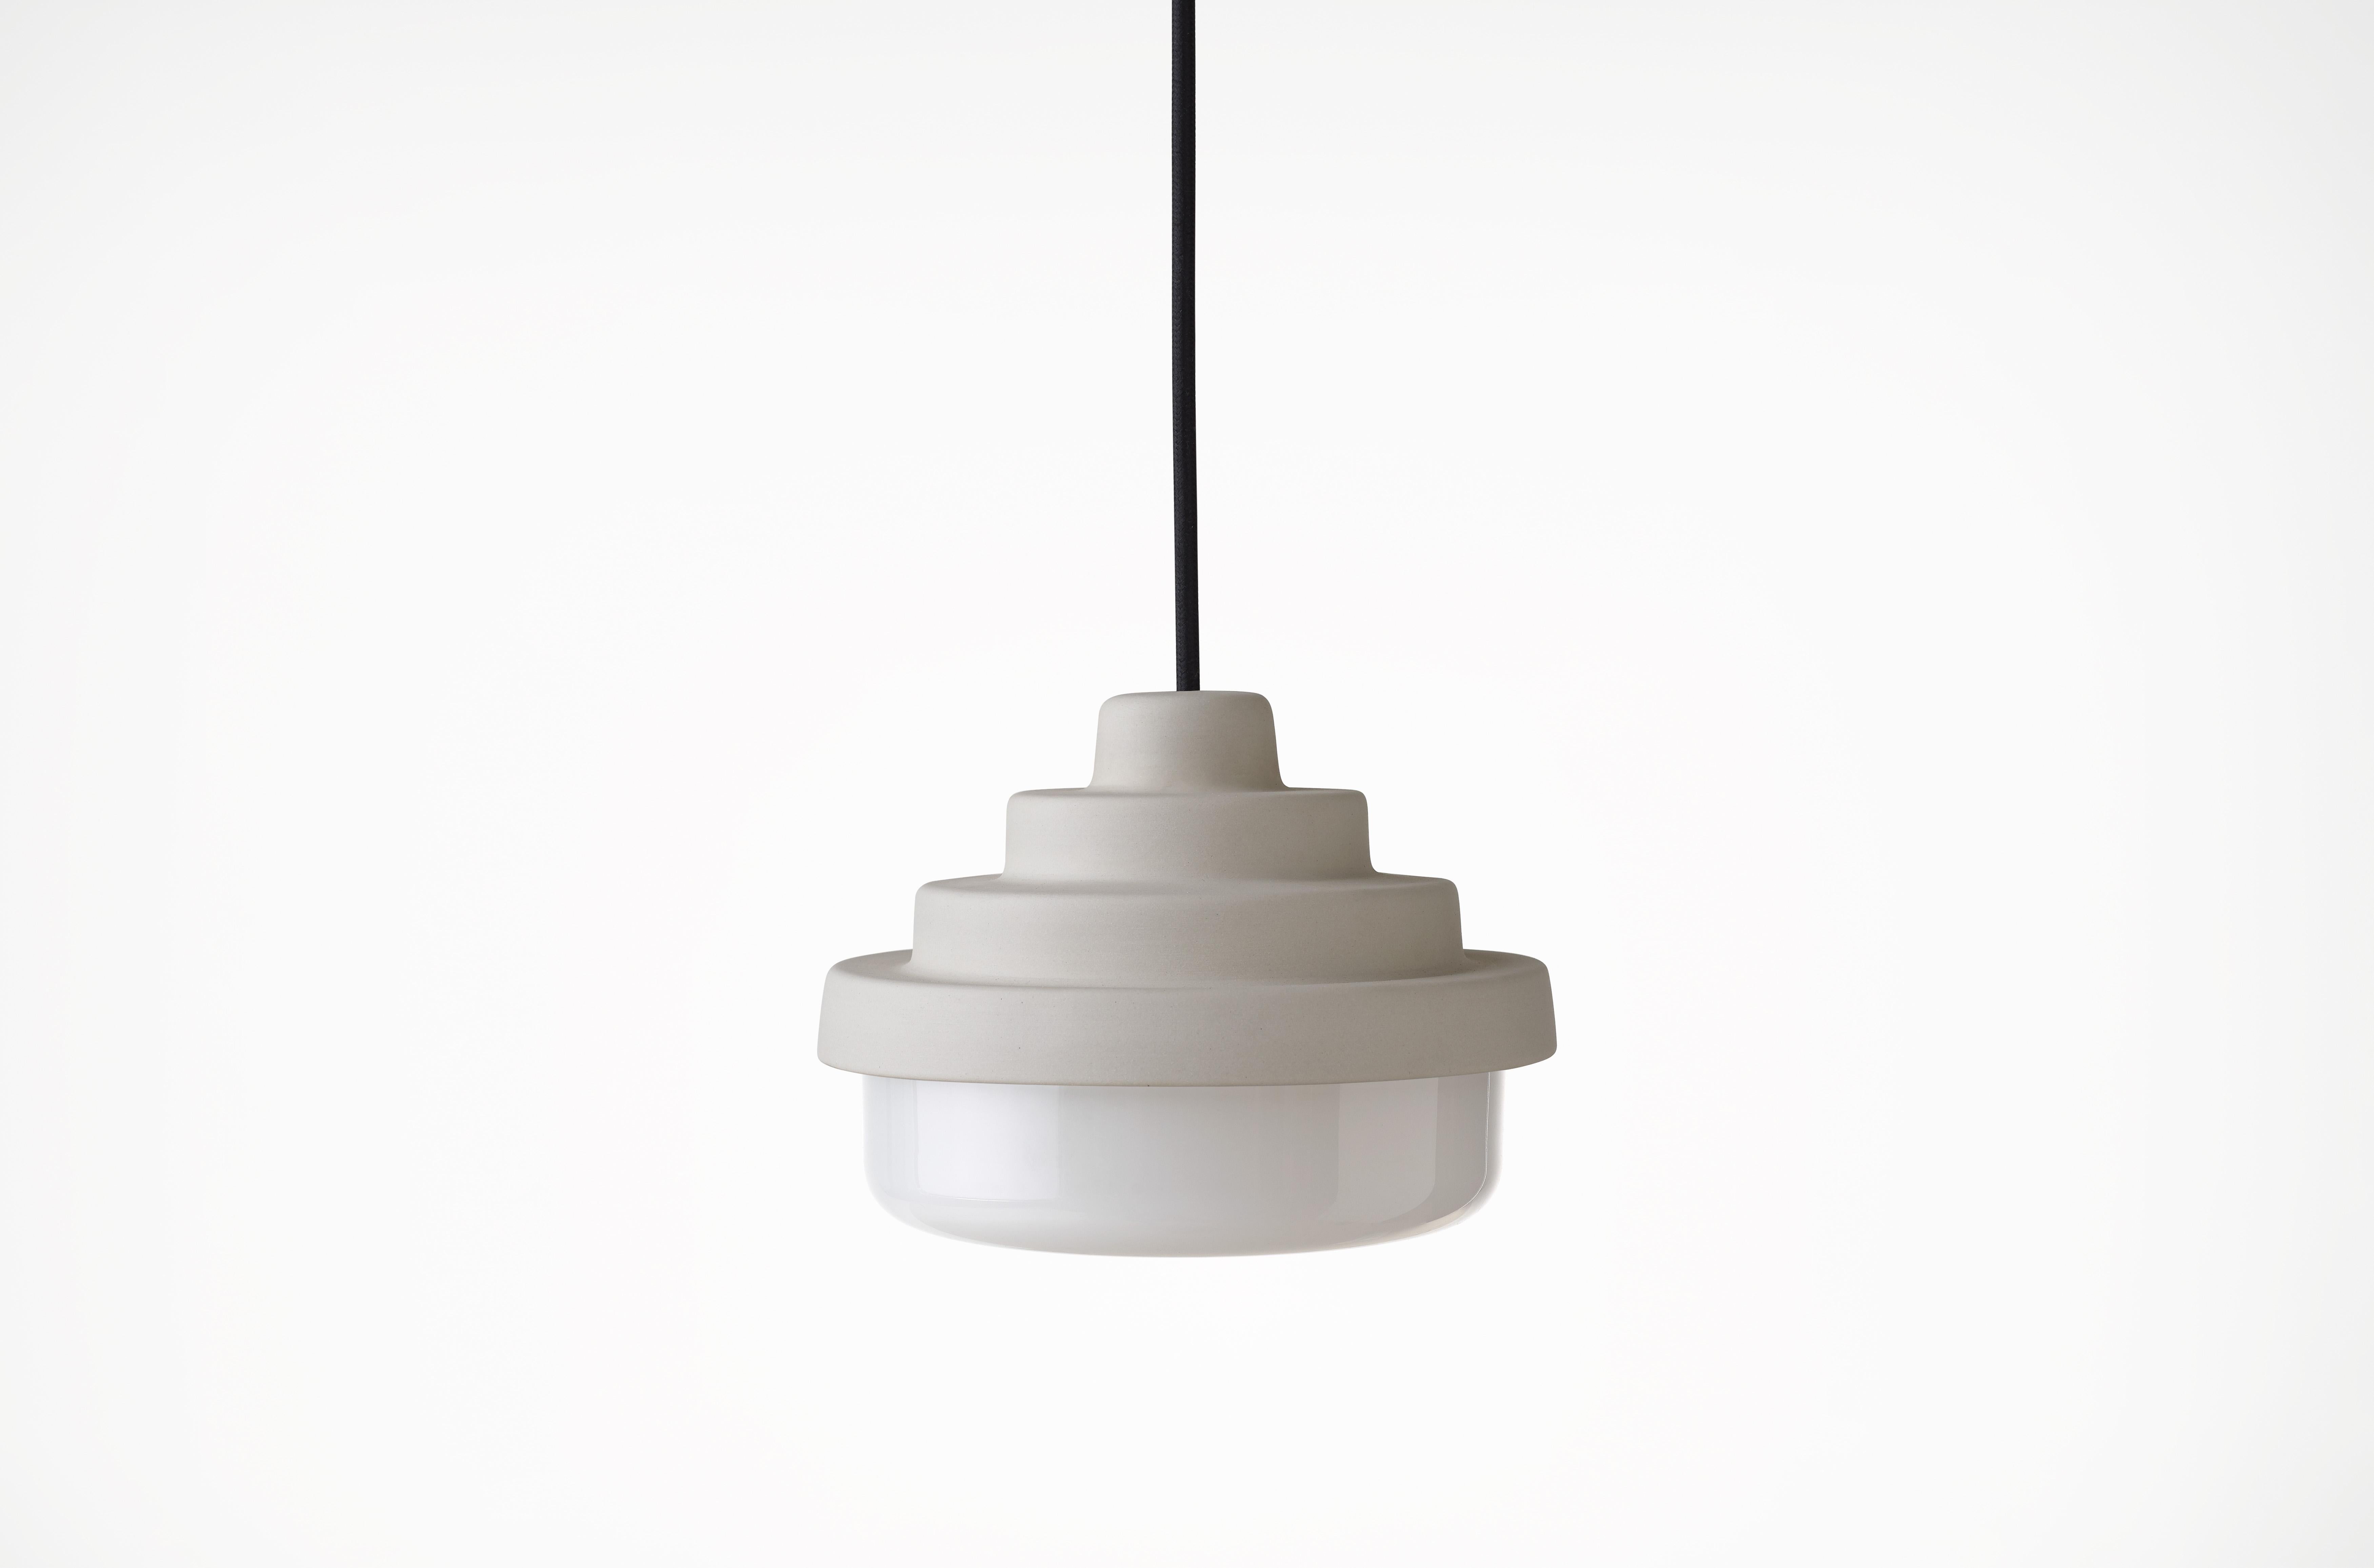 Raw and White Honey Pendant Light by Coco Flip
Dimensions: D 18 x W 18 x H 13 cm
Materials: Slip cast ceramic stoneware with blown glass. 
Weight: Approx. 2kg
Glass finishes: White.
Ceramic finishes: Raw unglazed stoneware. 

Standard fixtures